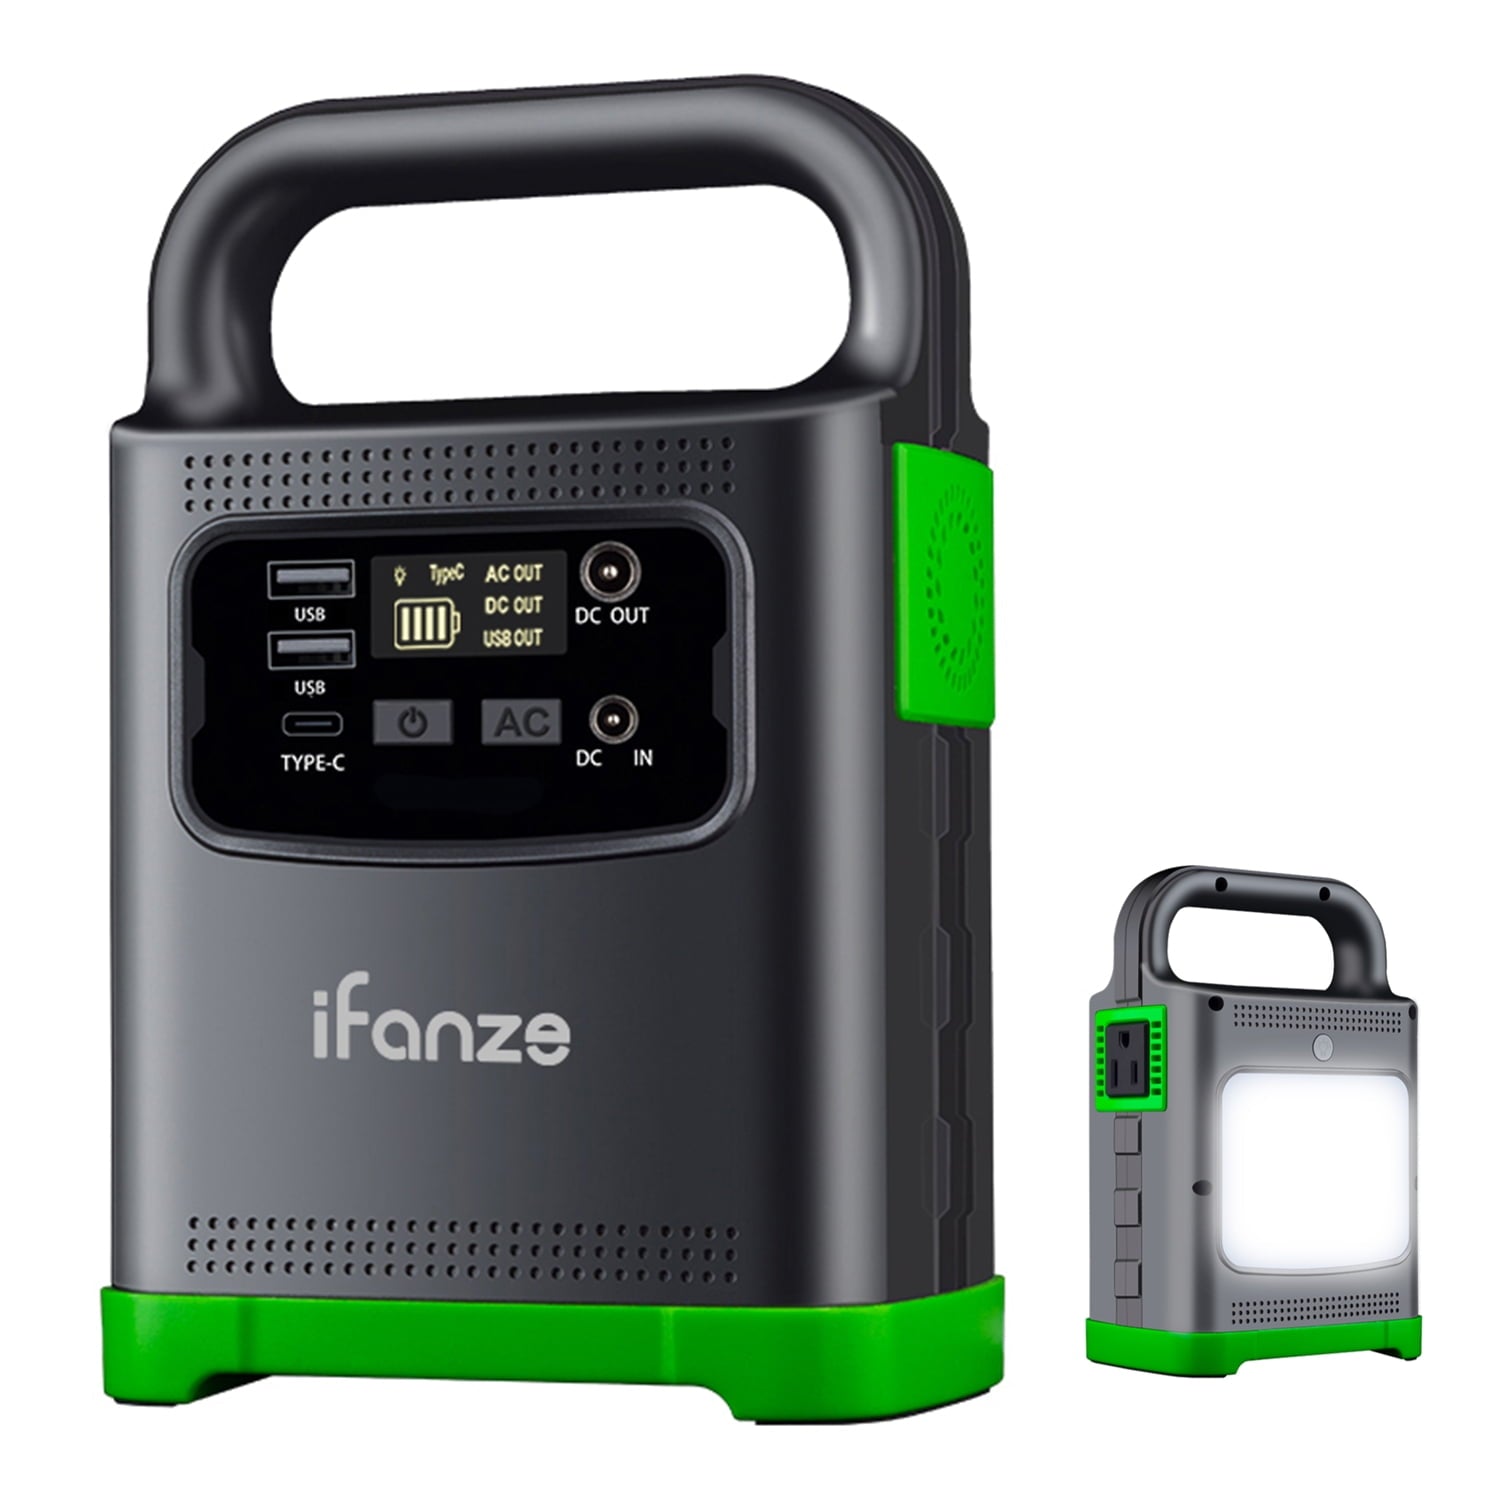 iFanze 120W Portable Power Station, 100Wh Camping Solar Generator Lithium Battery Power 110V/120W AC, DC, USB QC3.0, LED Flashlight Emergency Lithium Battery, Power Outage